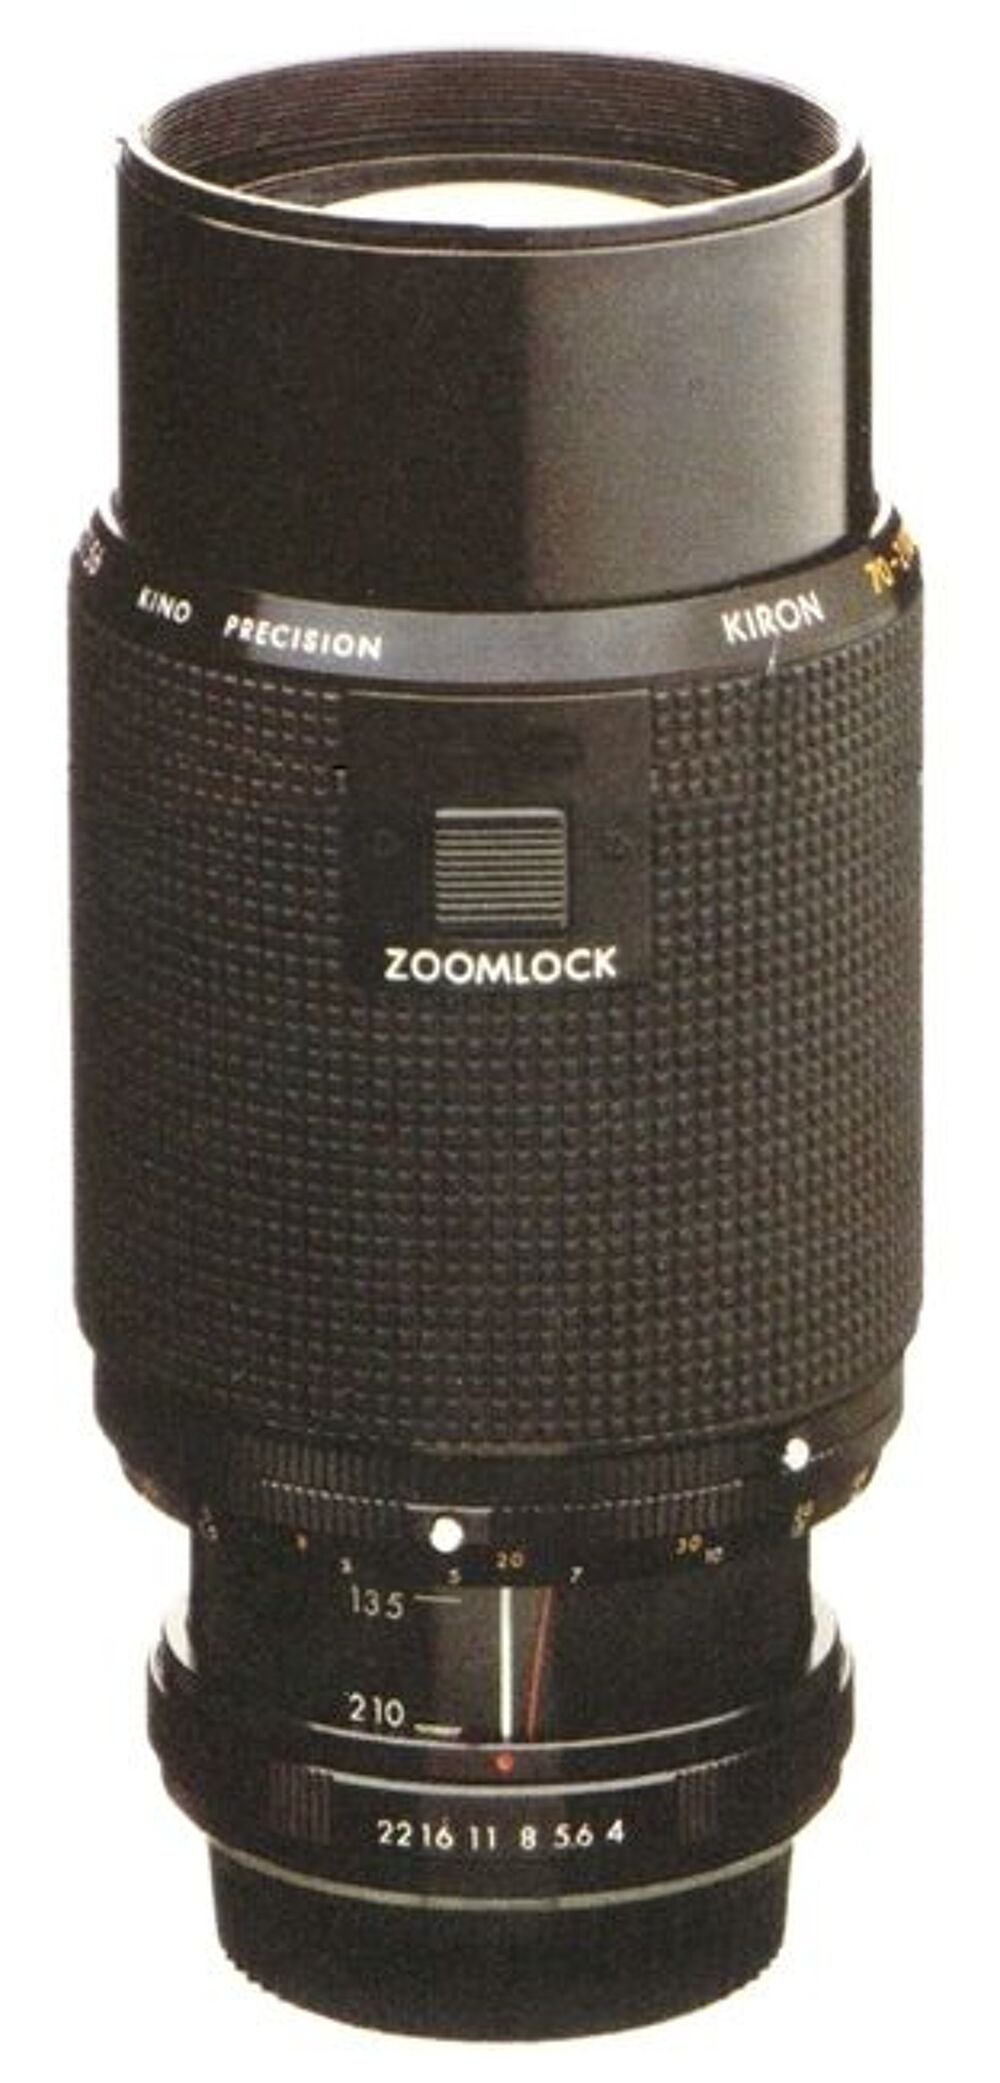 zoom Kiron 70mm - 210 mm Photos/Video/TV